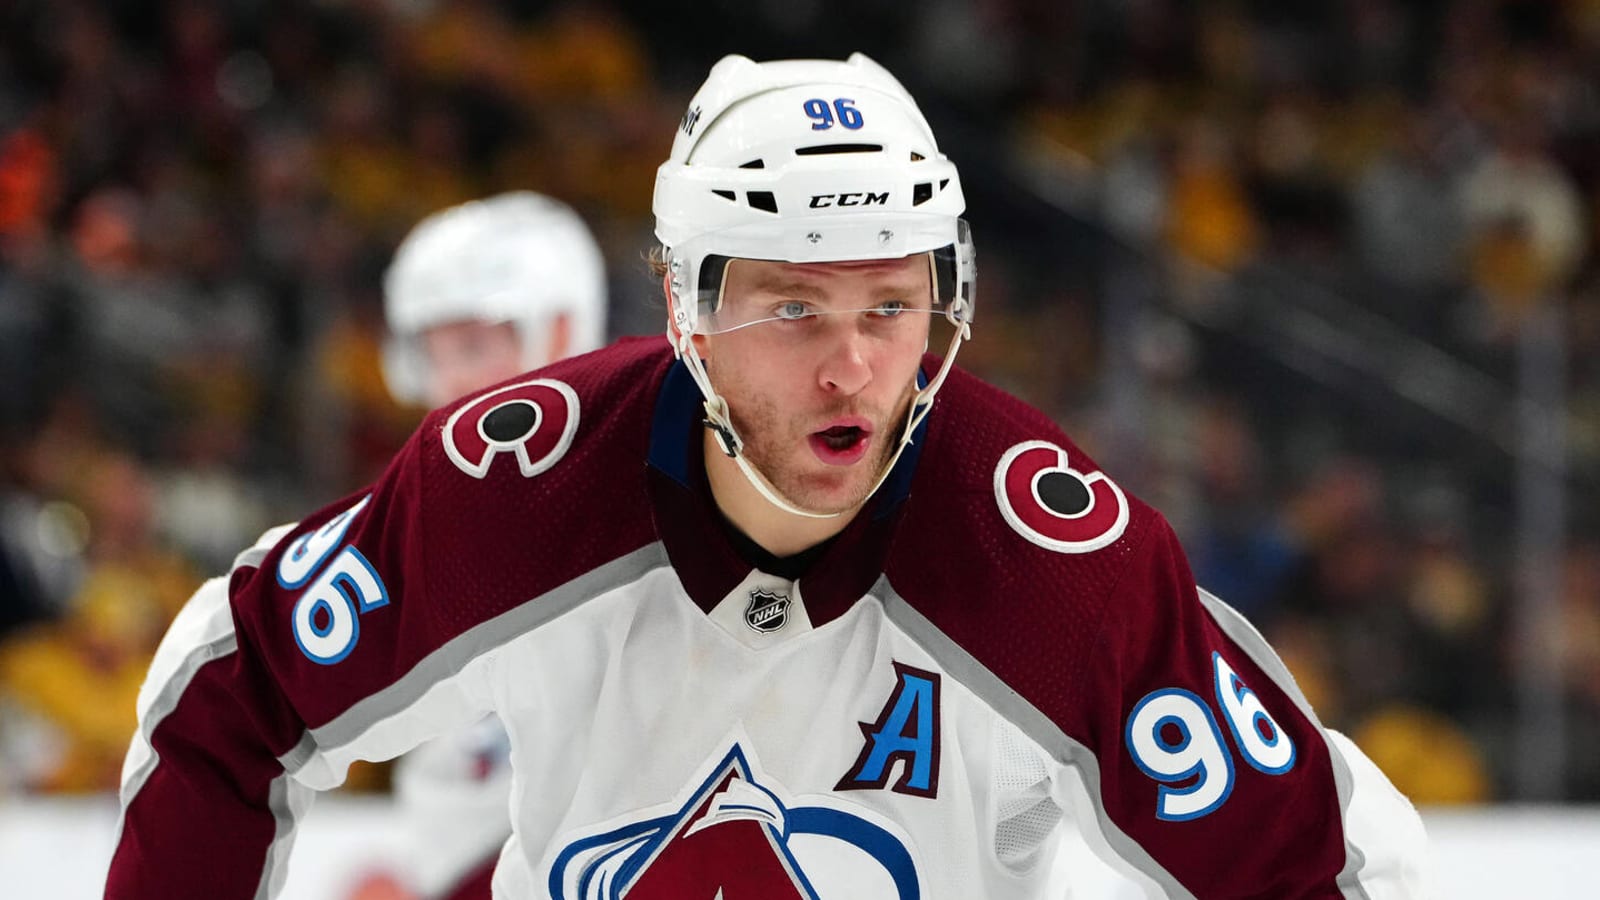 Avalanche Gameday: Focus On 60, No Concern For Star Players